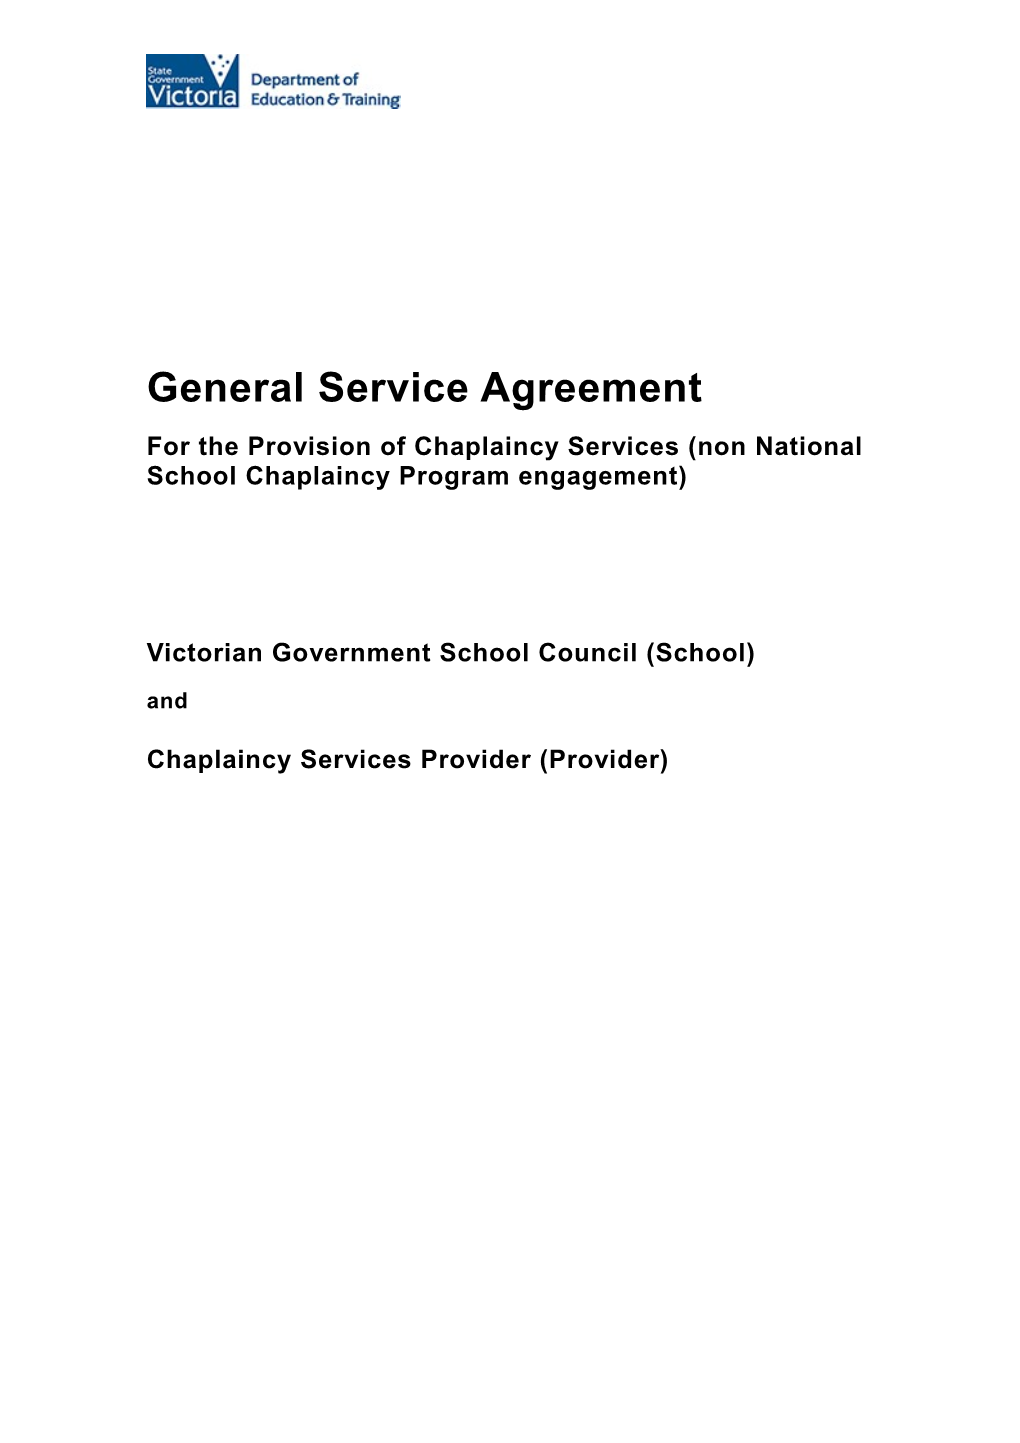 Chaplaincy Services - General Agreement (Non NSCP Agreement)